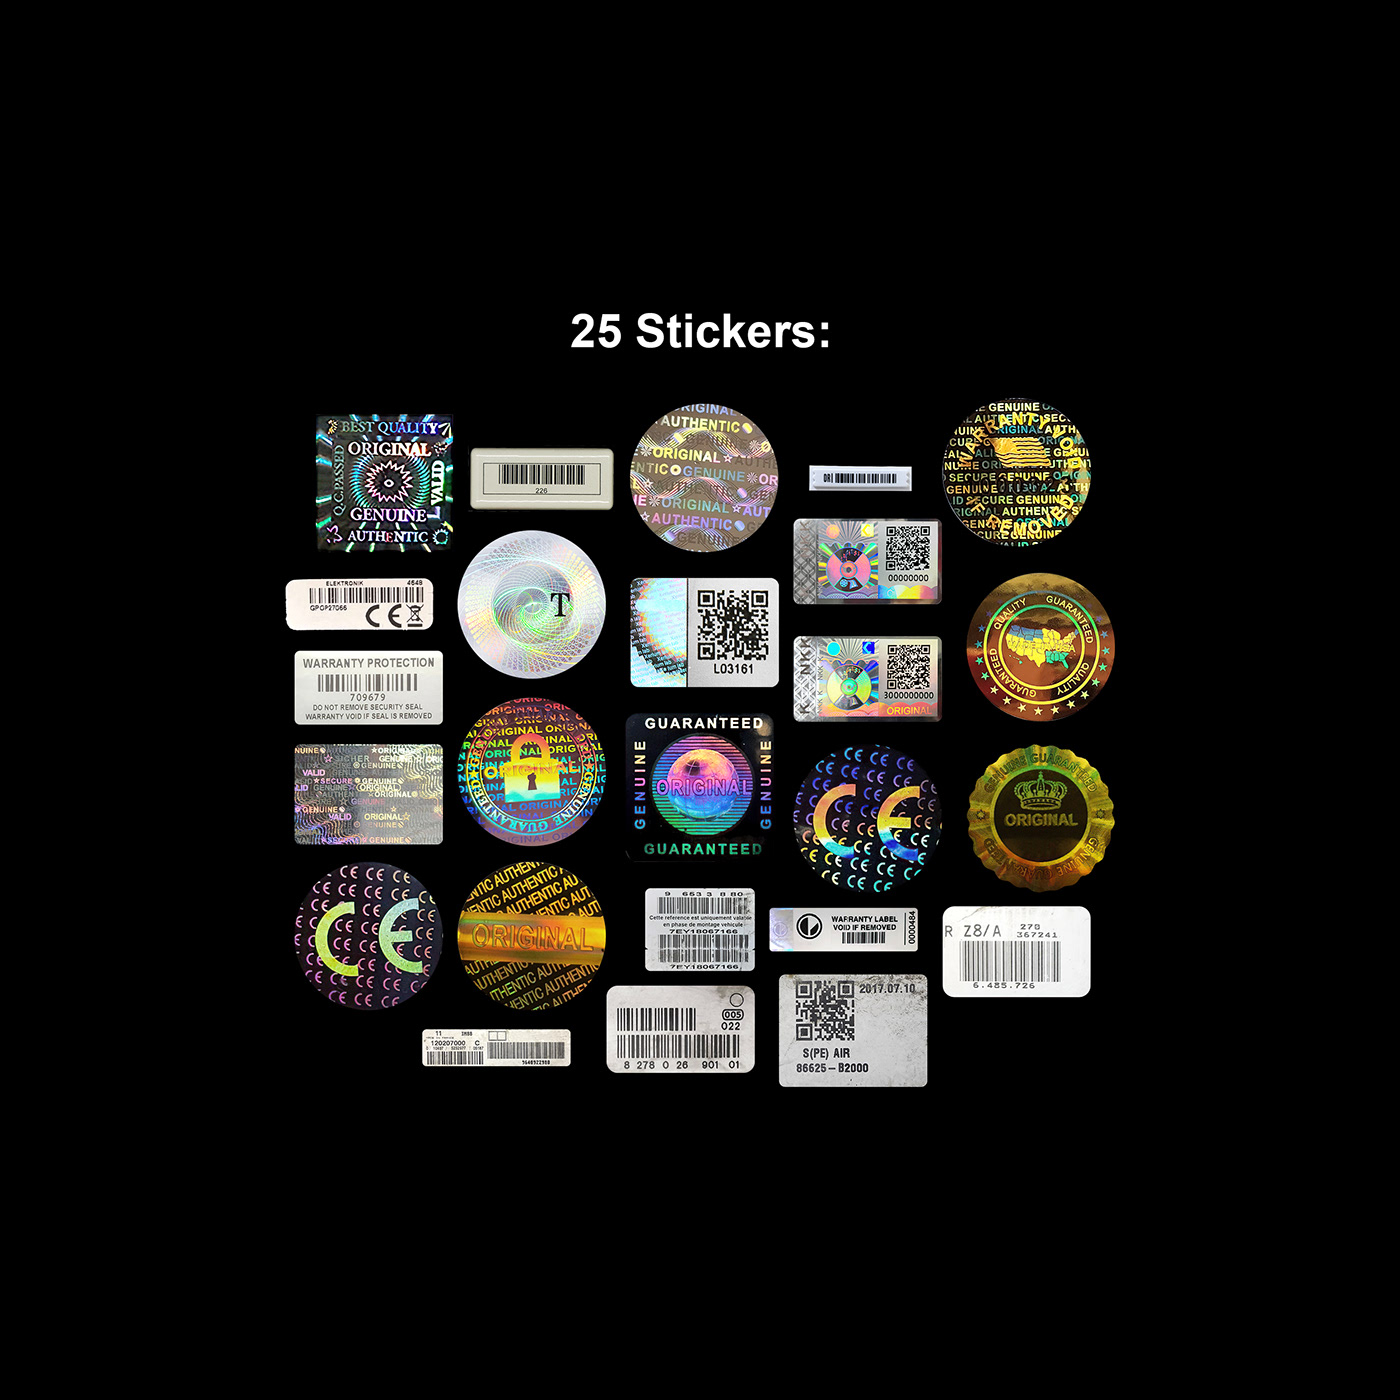 CD cover cd mockups CD music CD Music Cover cover mockup holographic stickers mockup pack Mockup Packaging mockup psd Retro